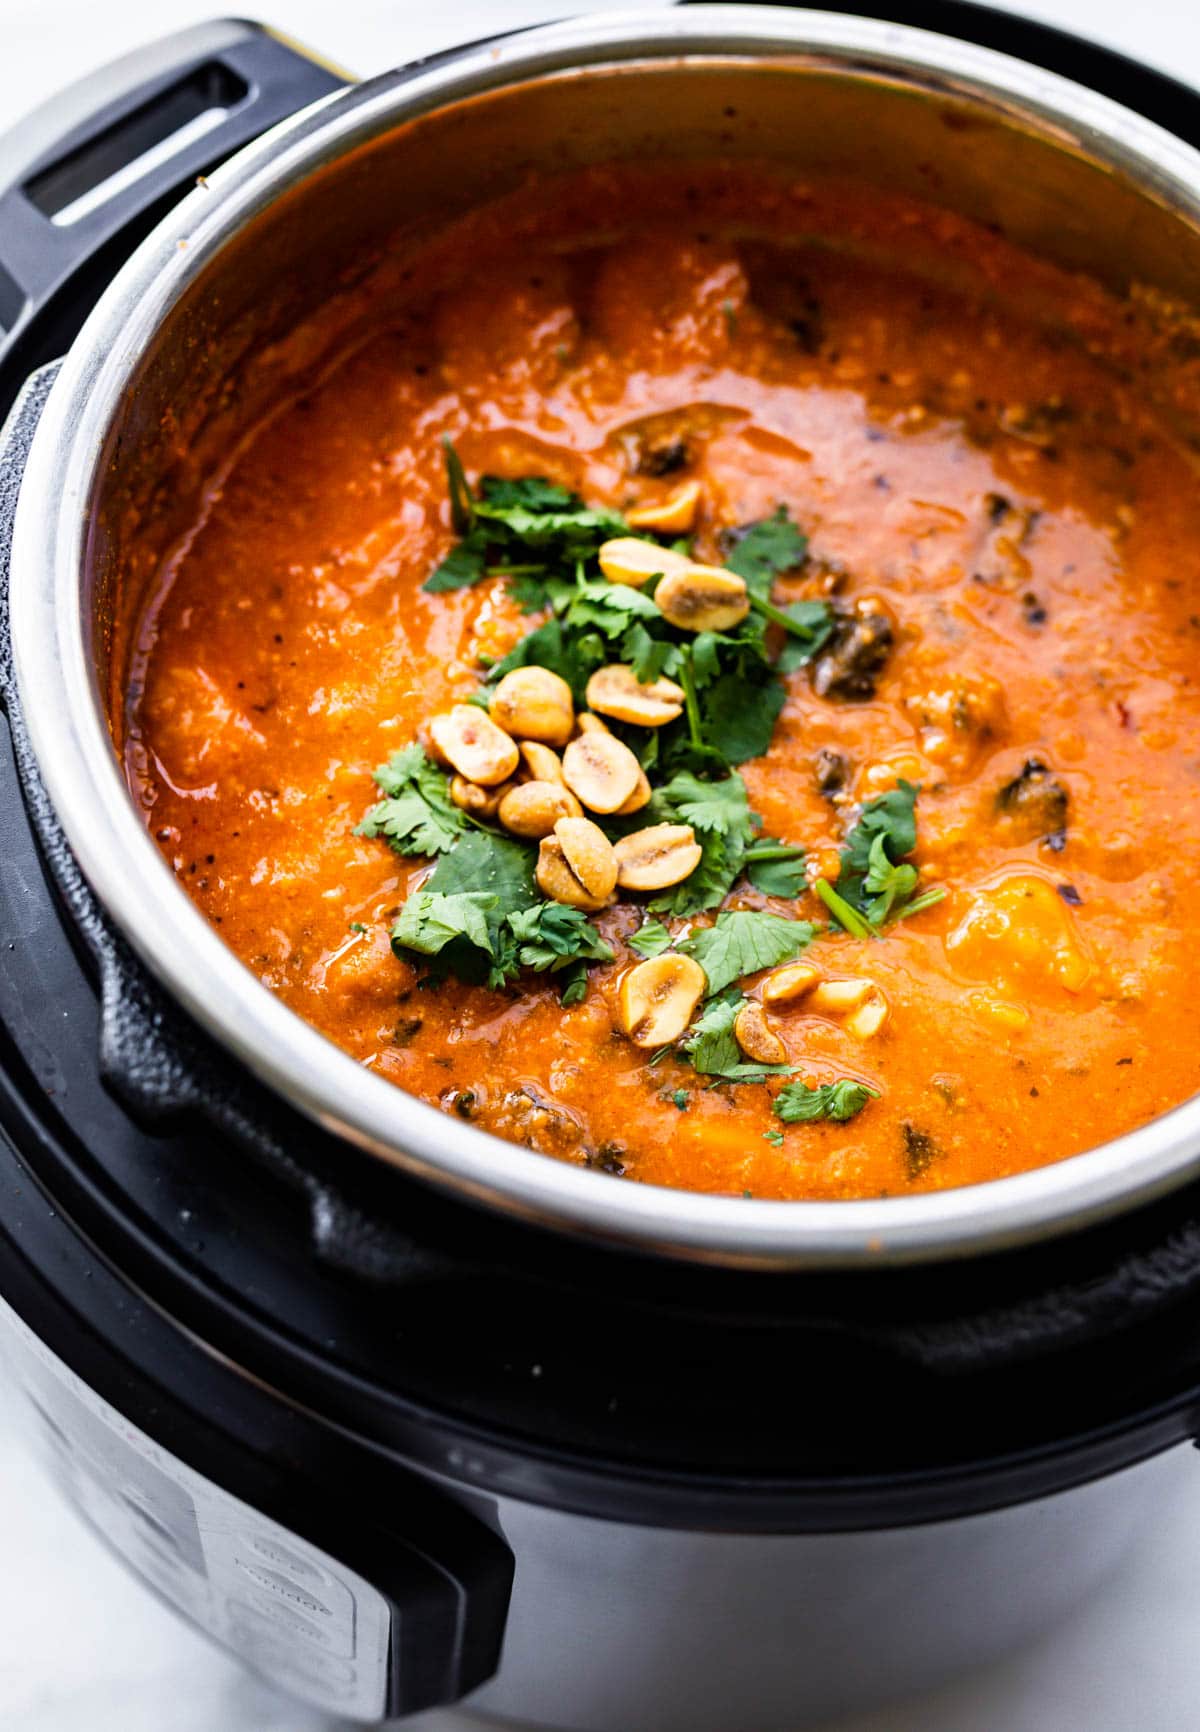 tomato-based stew with peanuts cooking in Instant Pot